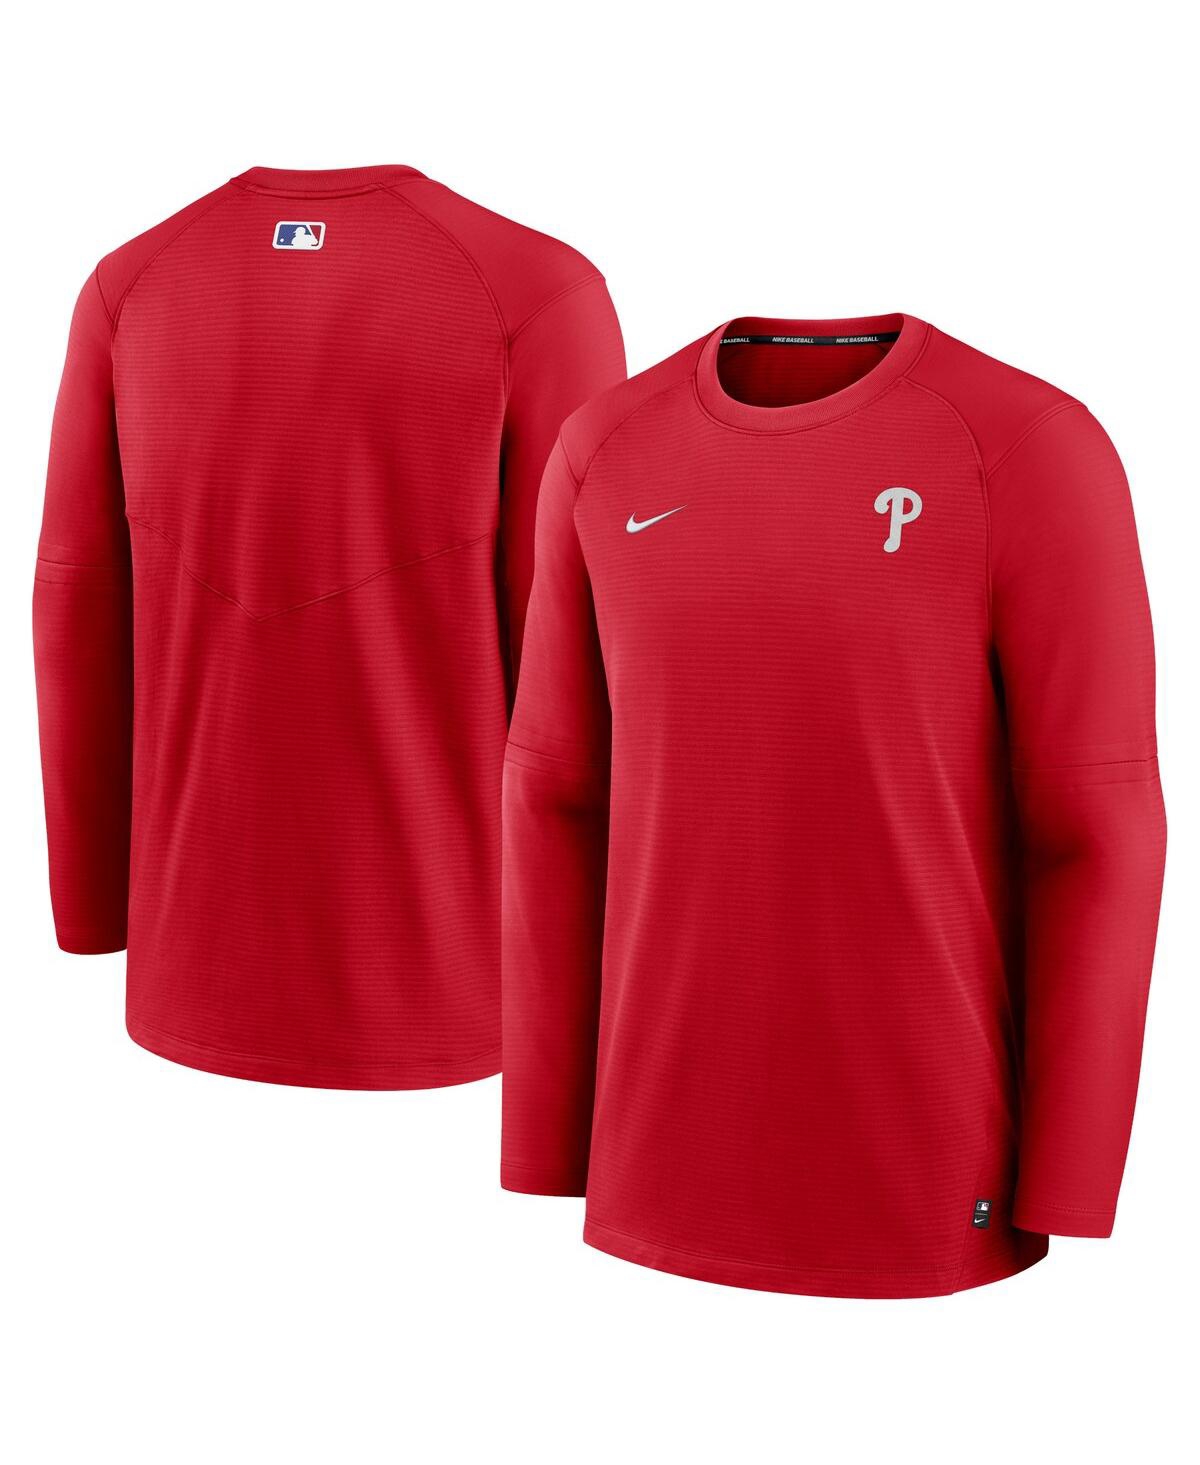 NIKE MEN'S NIKE RED PHILADELPHIA PHILLIES AUTHENTIC COLLECTION LOGO PERFORMANCE LONG SLEEVE T-SHIRT